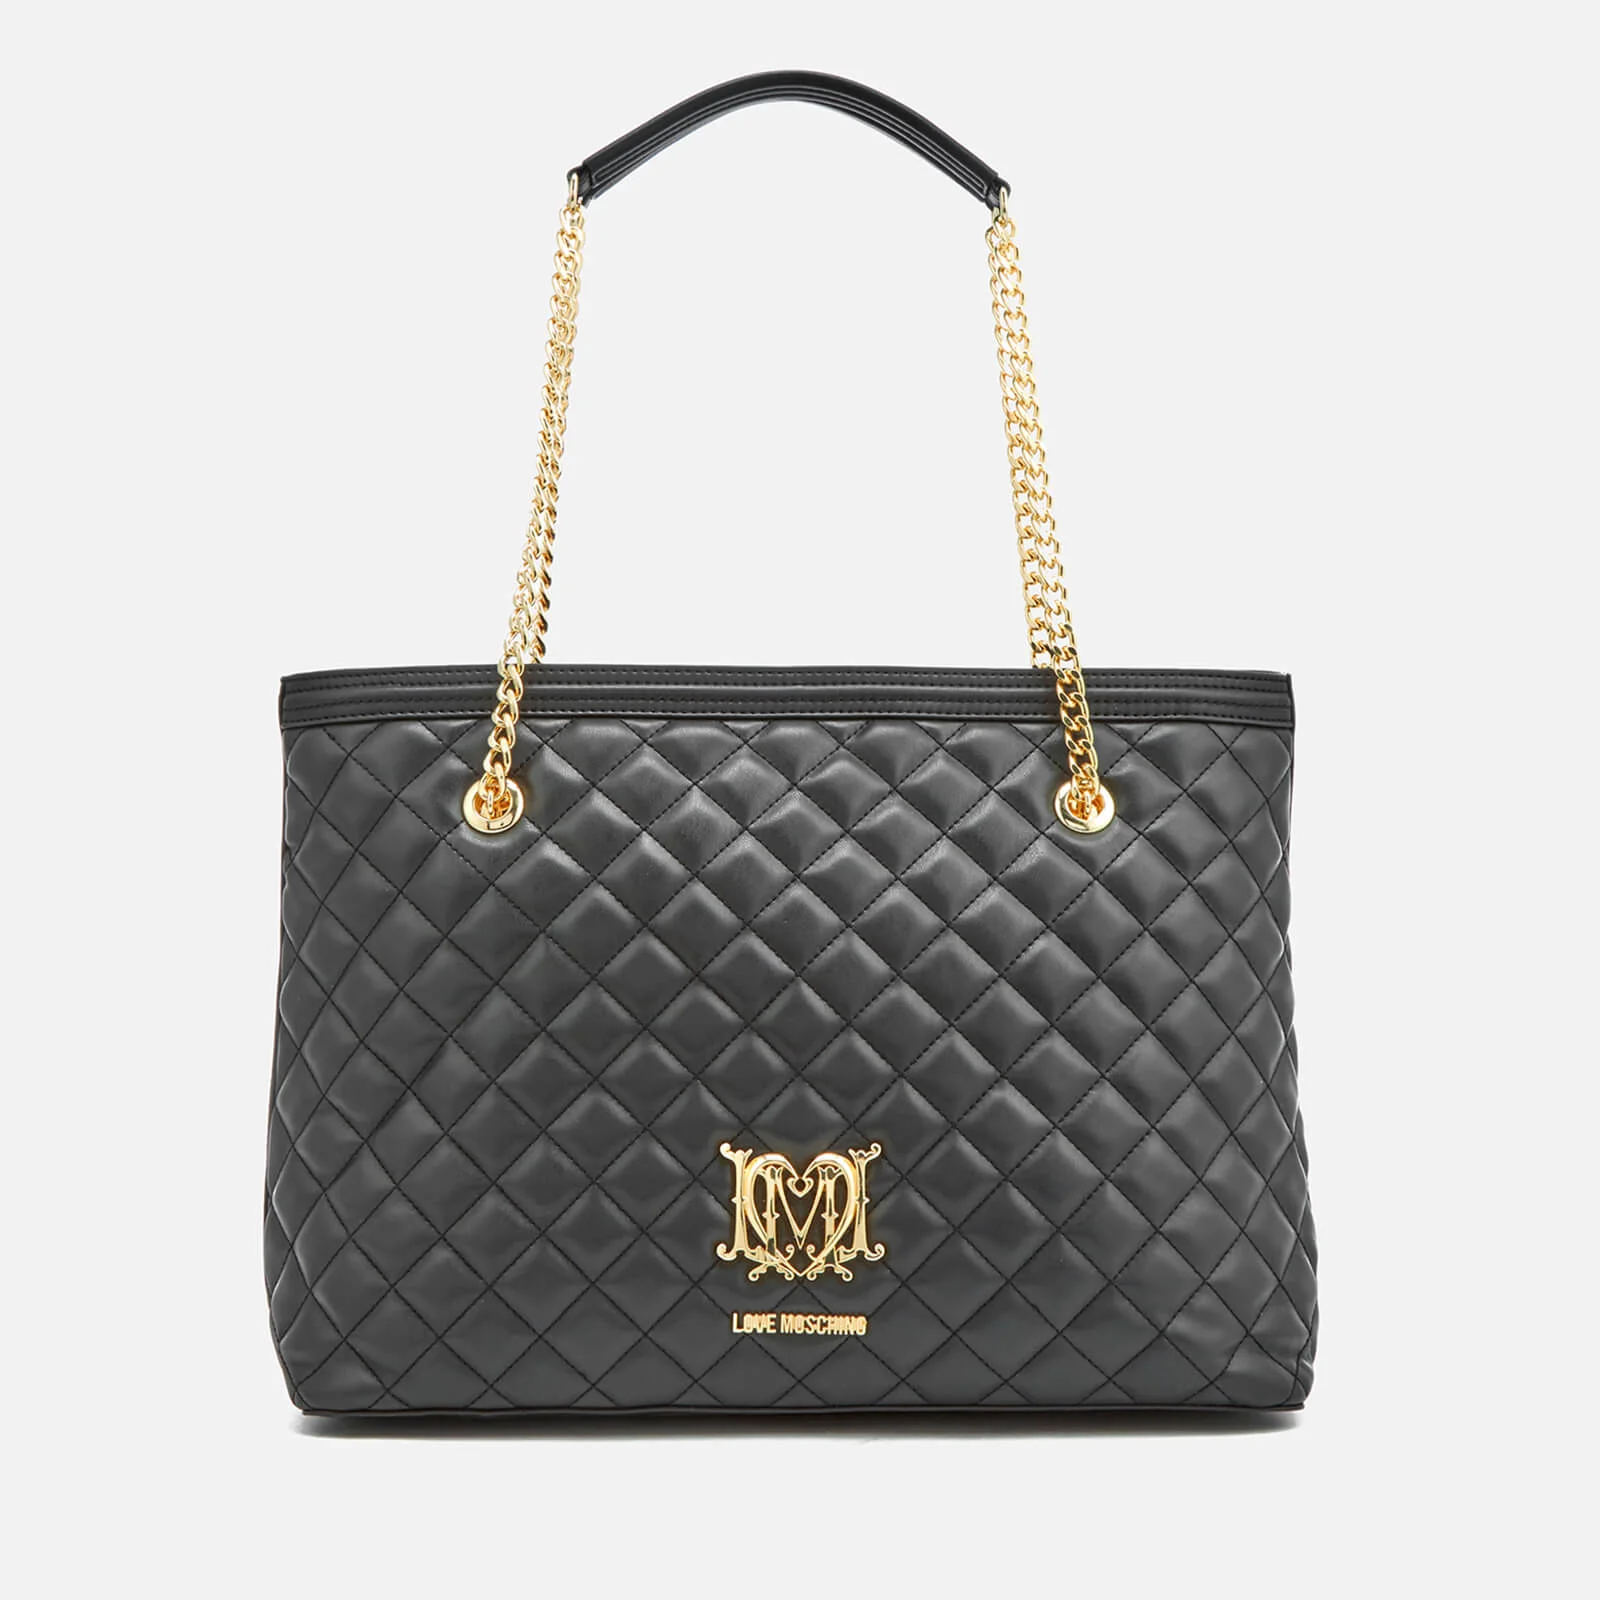 Love Moschino Women's Quilted Large Shopper Tote Bag - Black Image 1